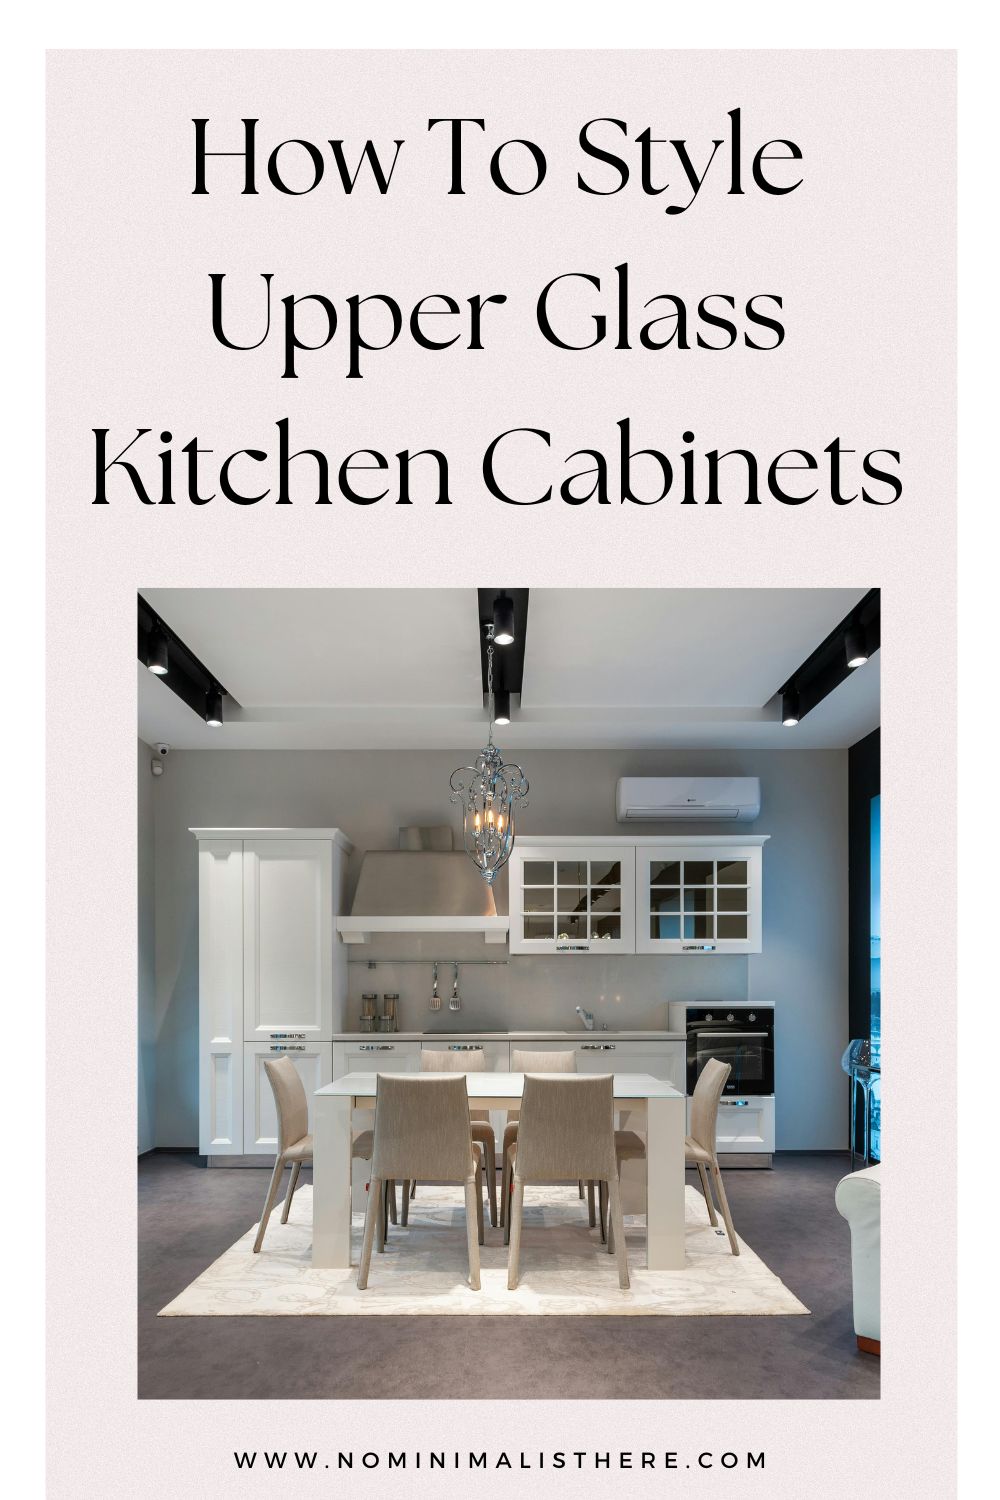 pinterest image about How To Style Upper Glass Kitchen Cabinets